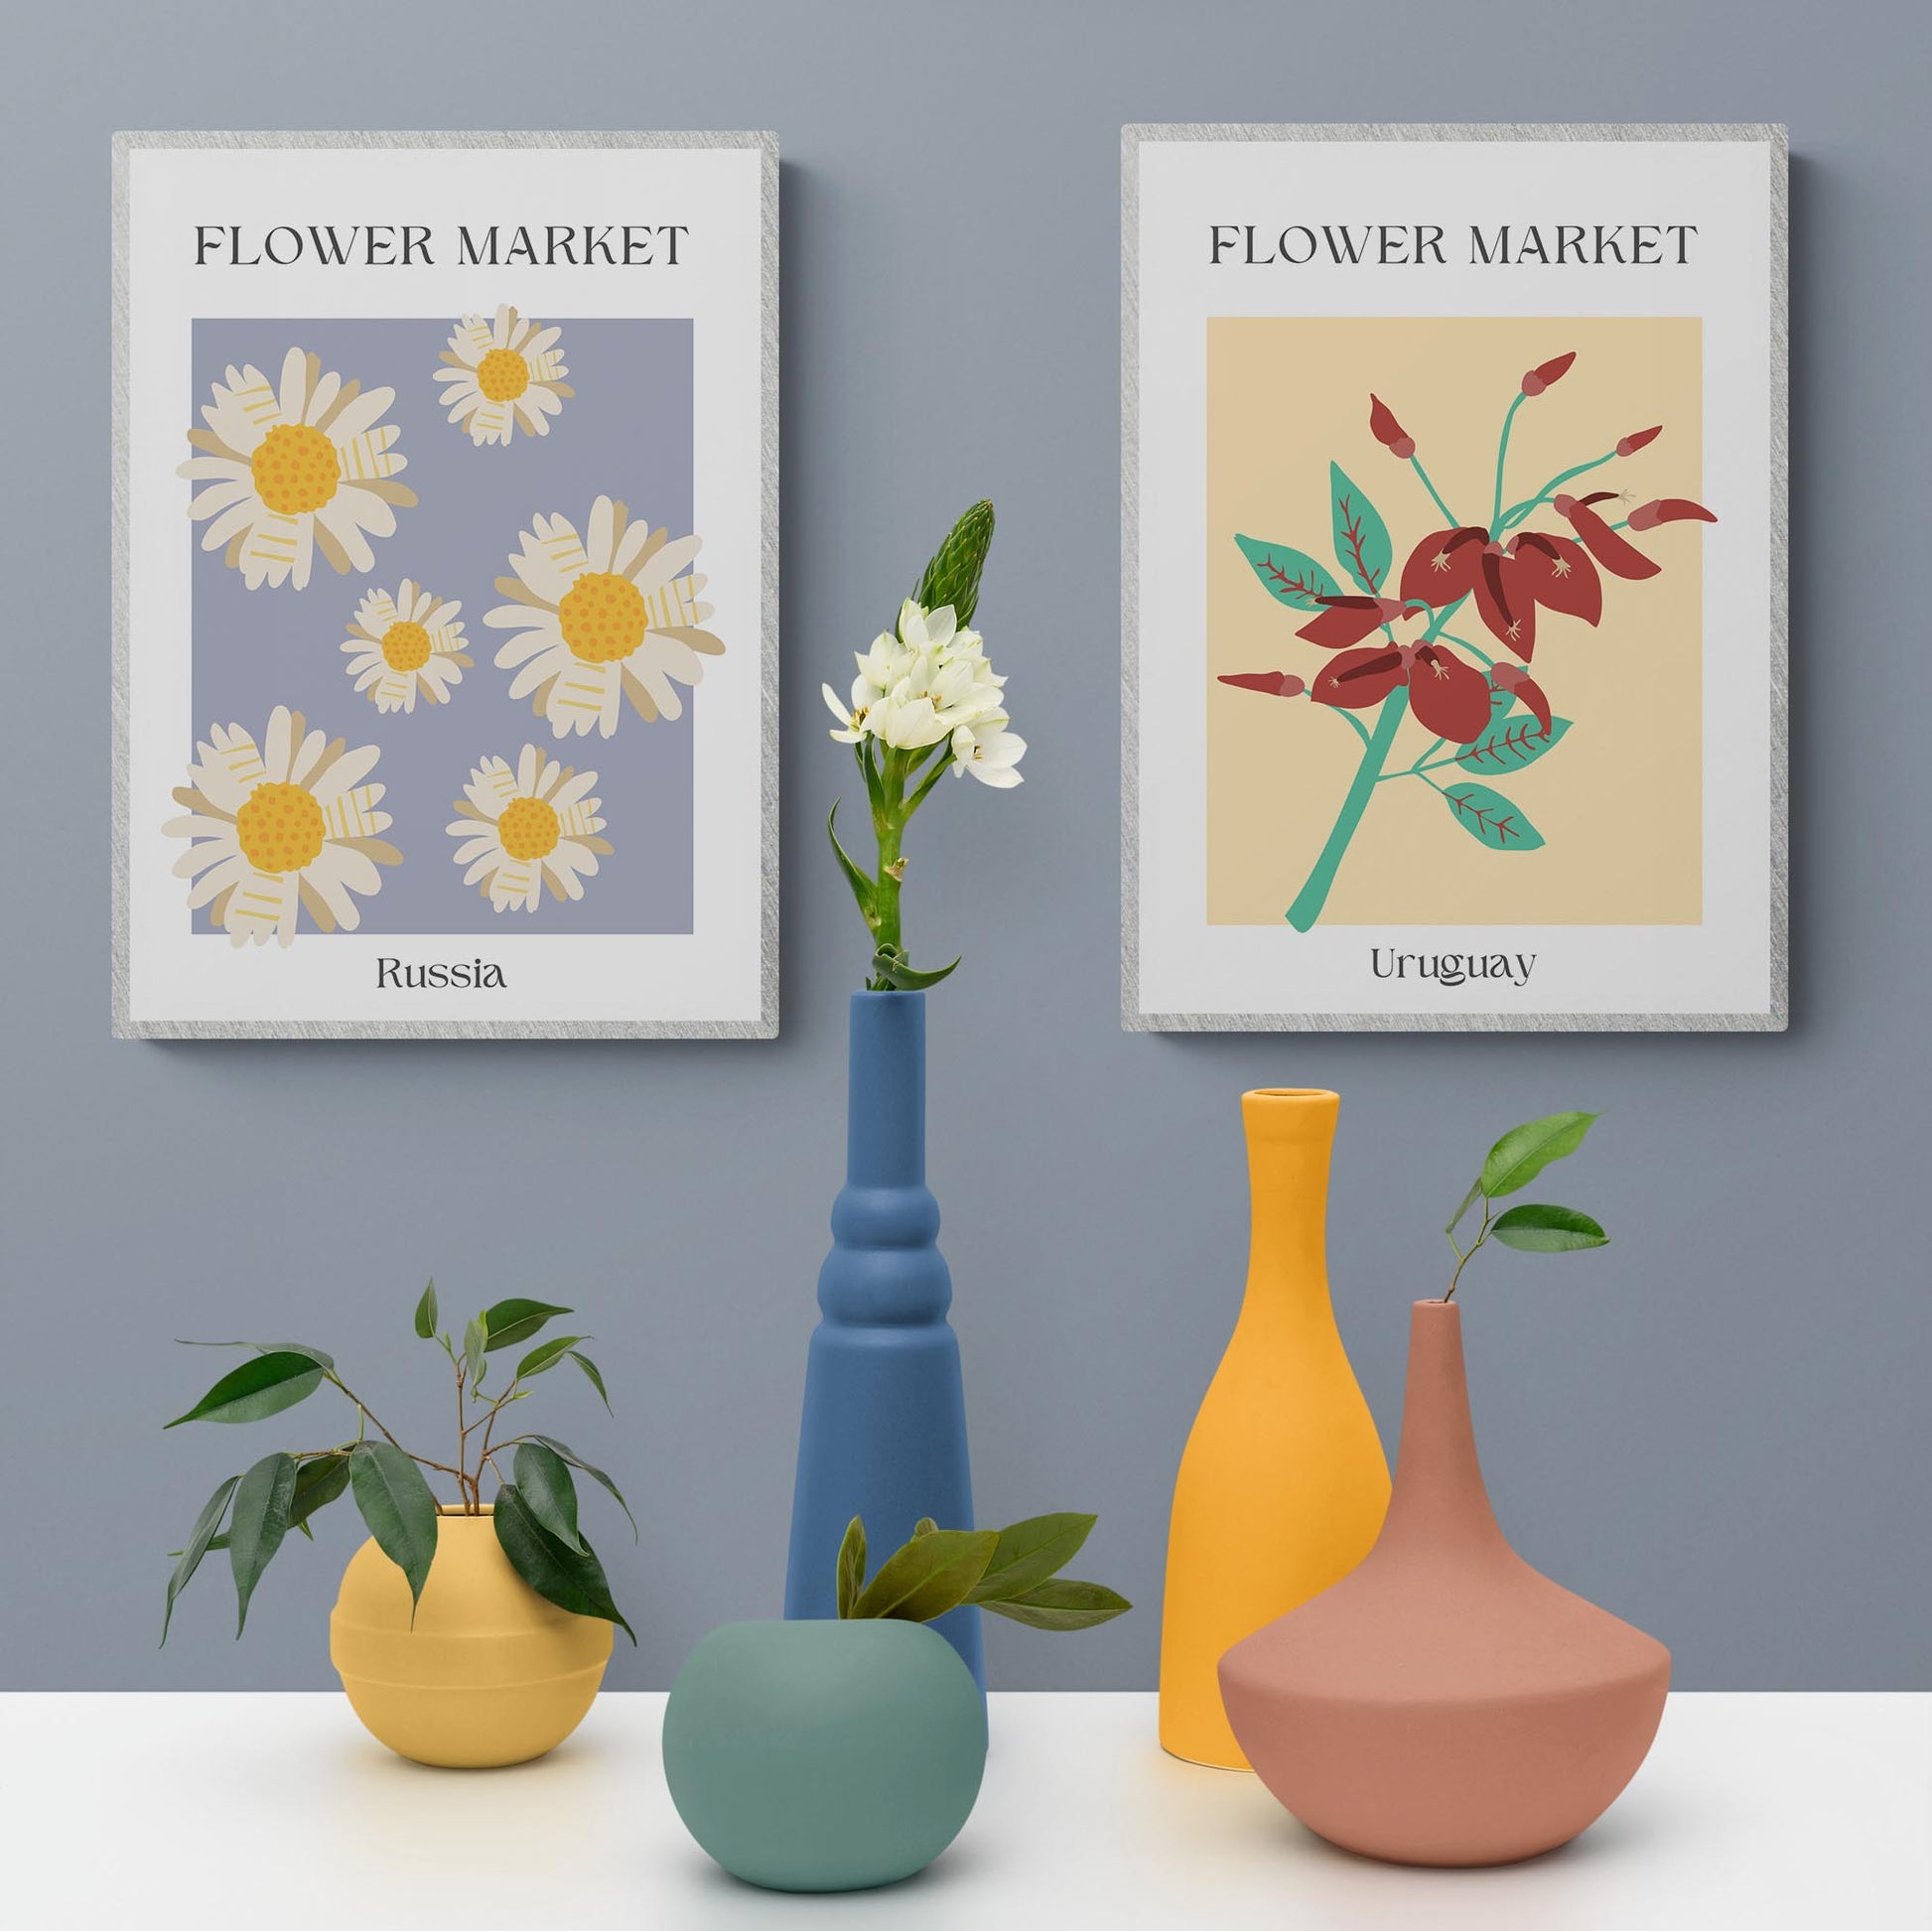 Delight in the vibrant flowers of the British Columbia with this beautiful Market Print. This kitchen poster is the perfect addition to any home, with its contemporary art prints and bespoke designs for bedroom walls and living rooms. Enjoy designer prints for wall that bring your walls to life.